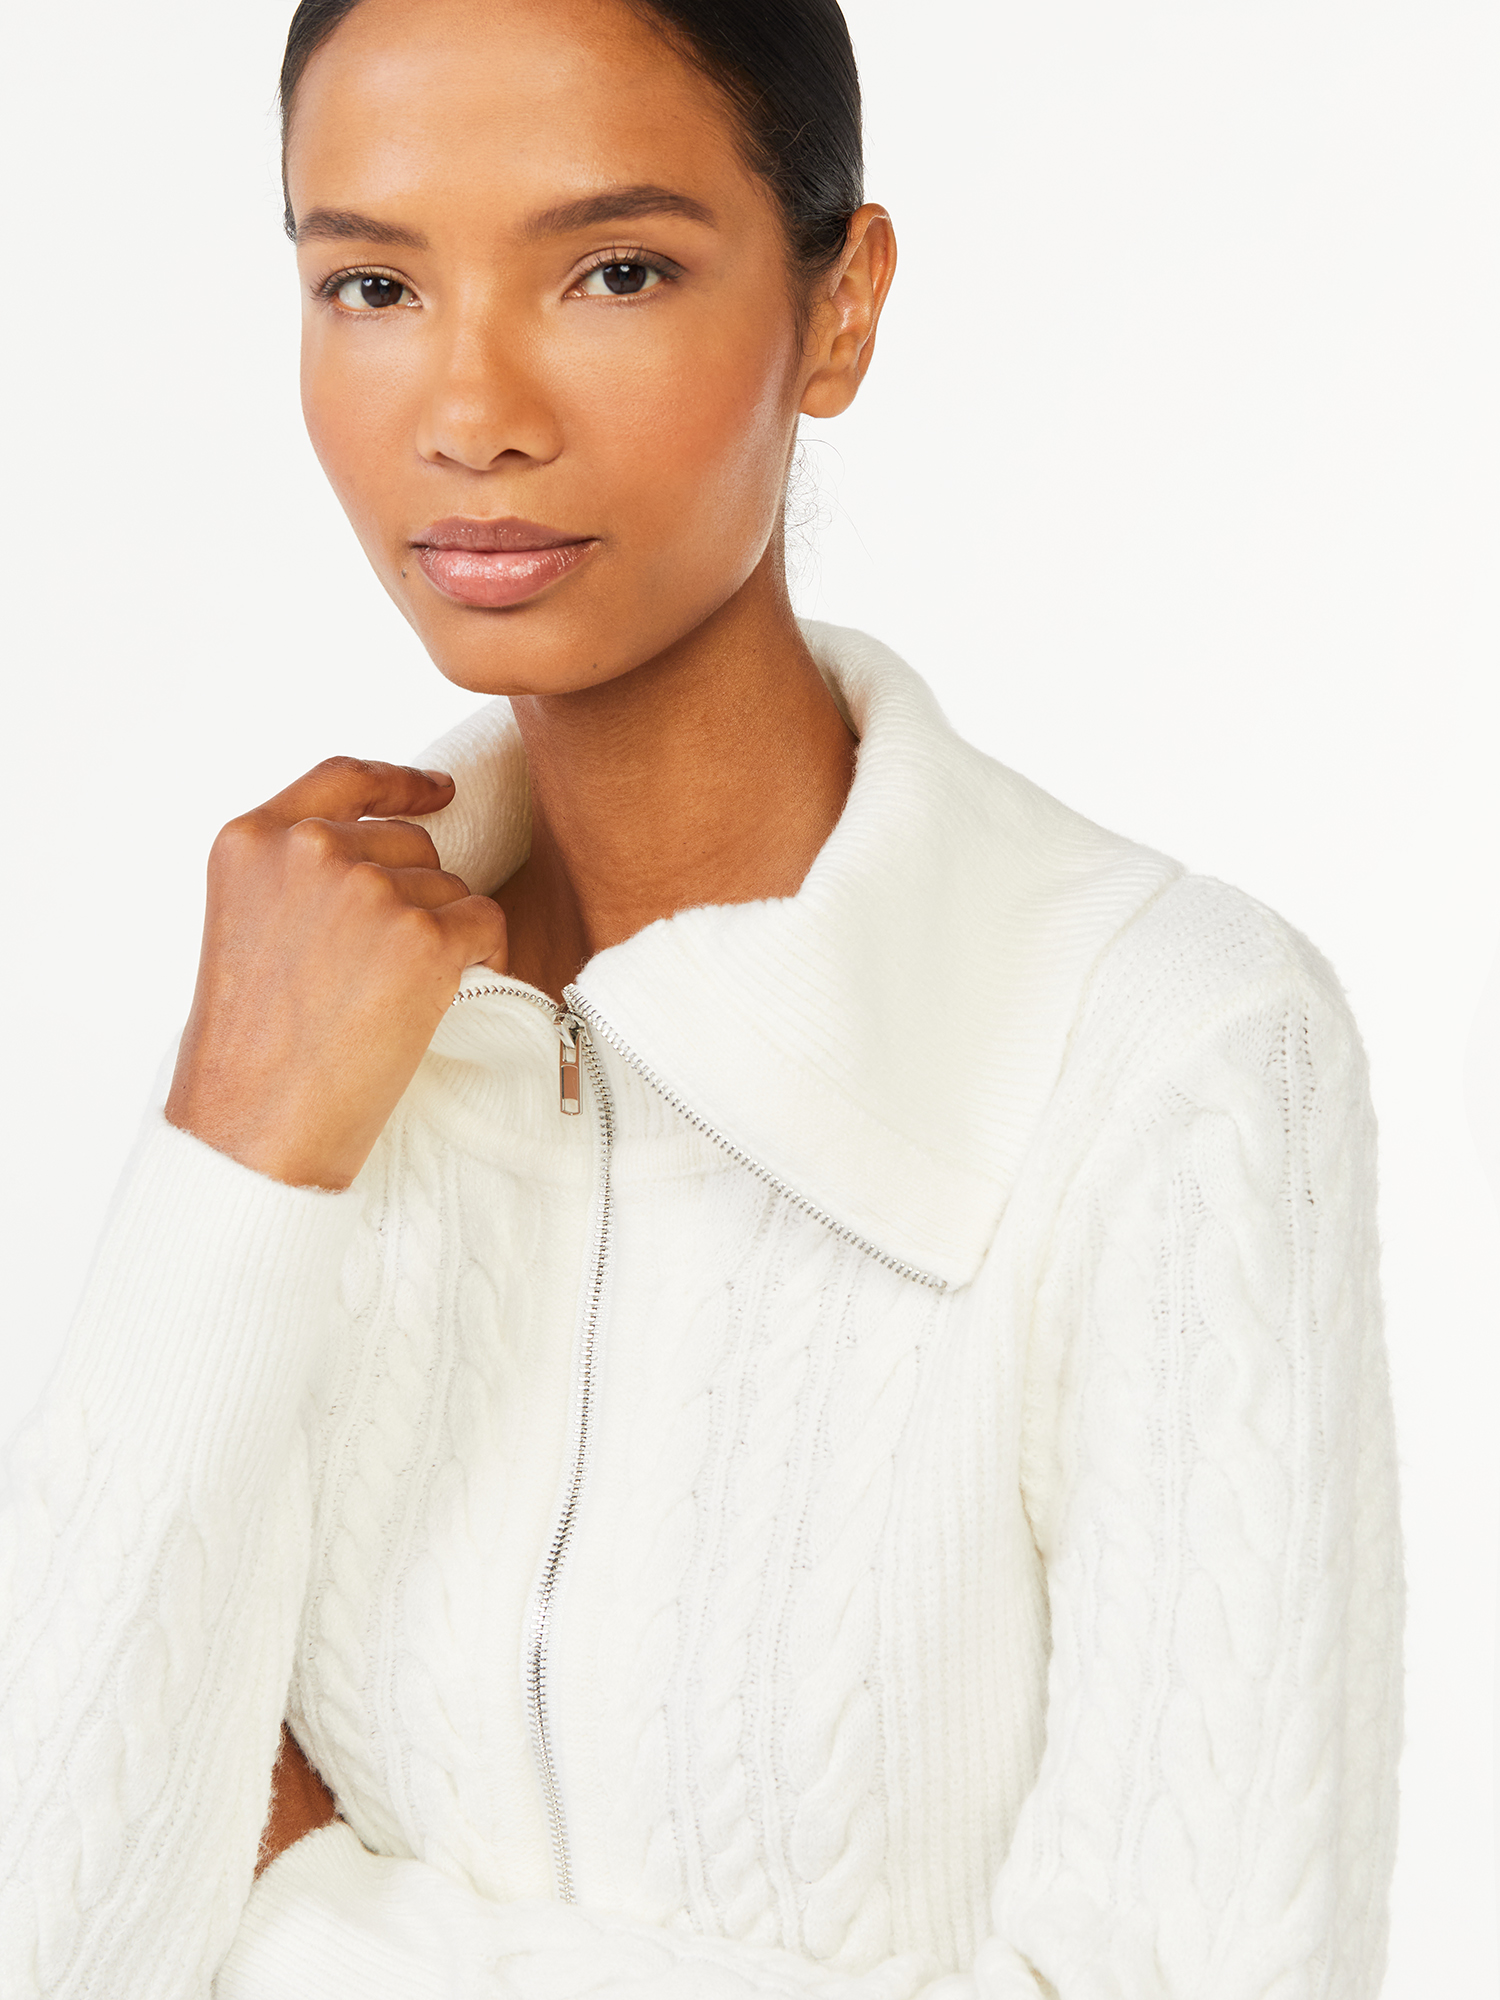 Scoop Women's Zip Front Cable Knit Sweater - image 2 of 5